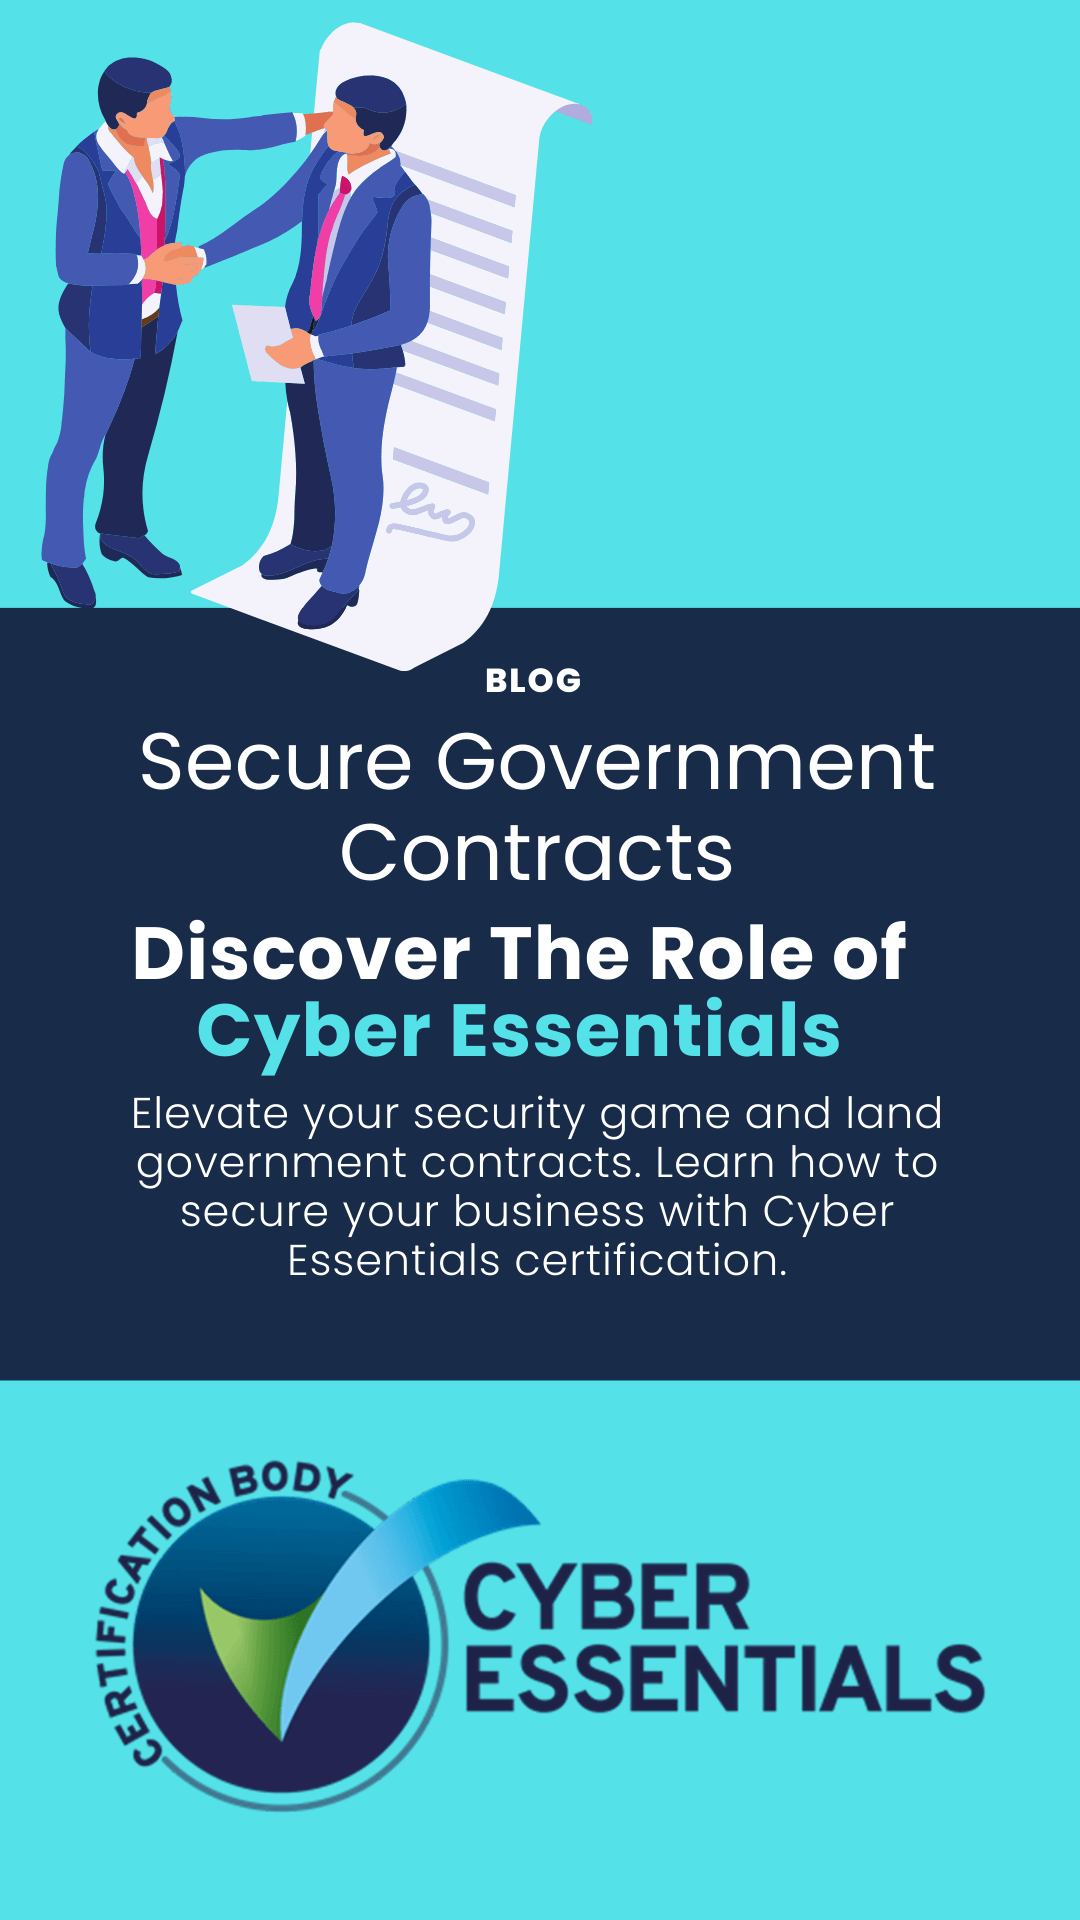 Blog image to promote article which educates readers on how Cyber Essentials scheme can help you gain government contracts.